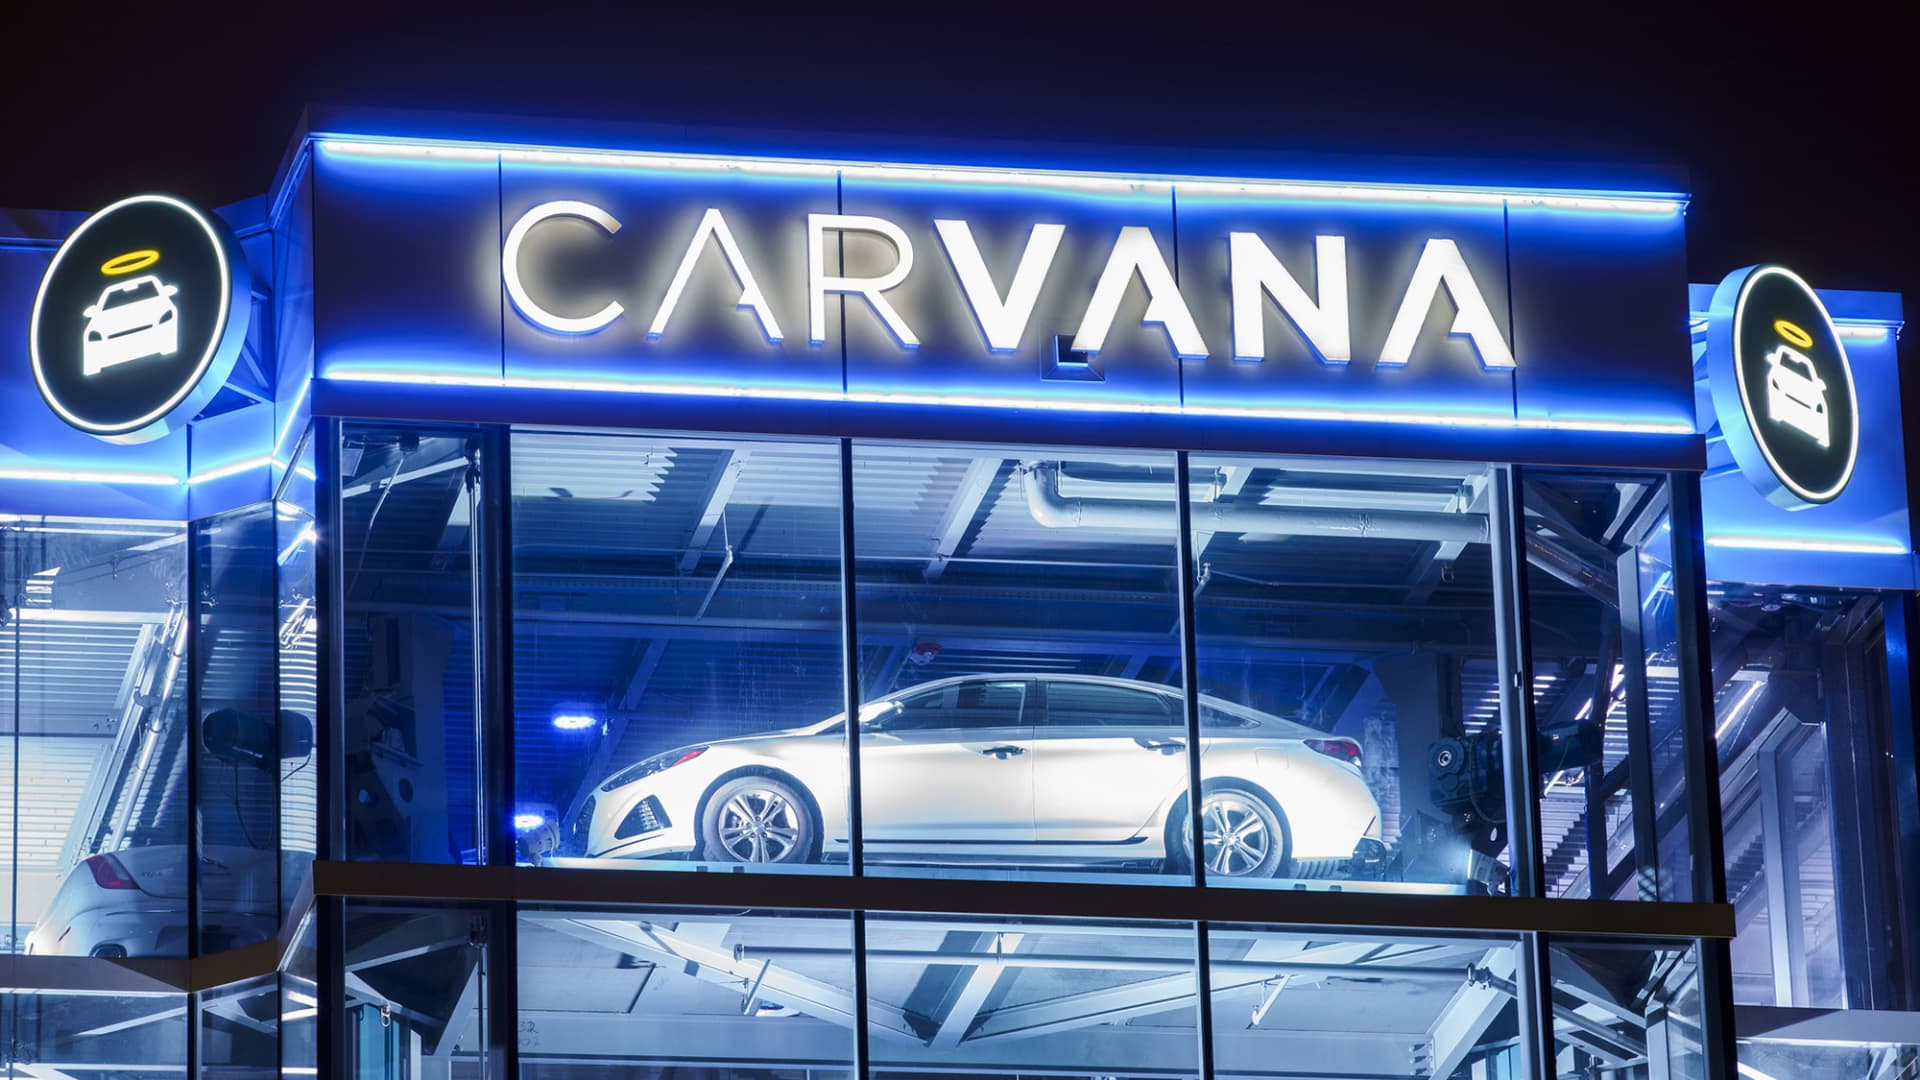 Carvana shares jump more than 20% on deal to reduce debt by $1.2 billion